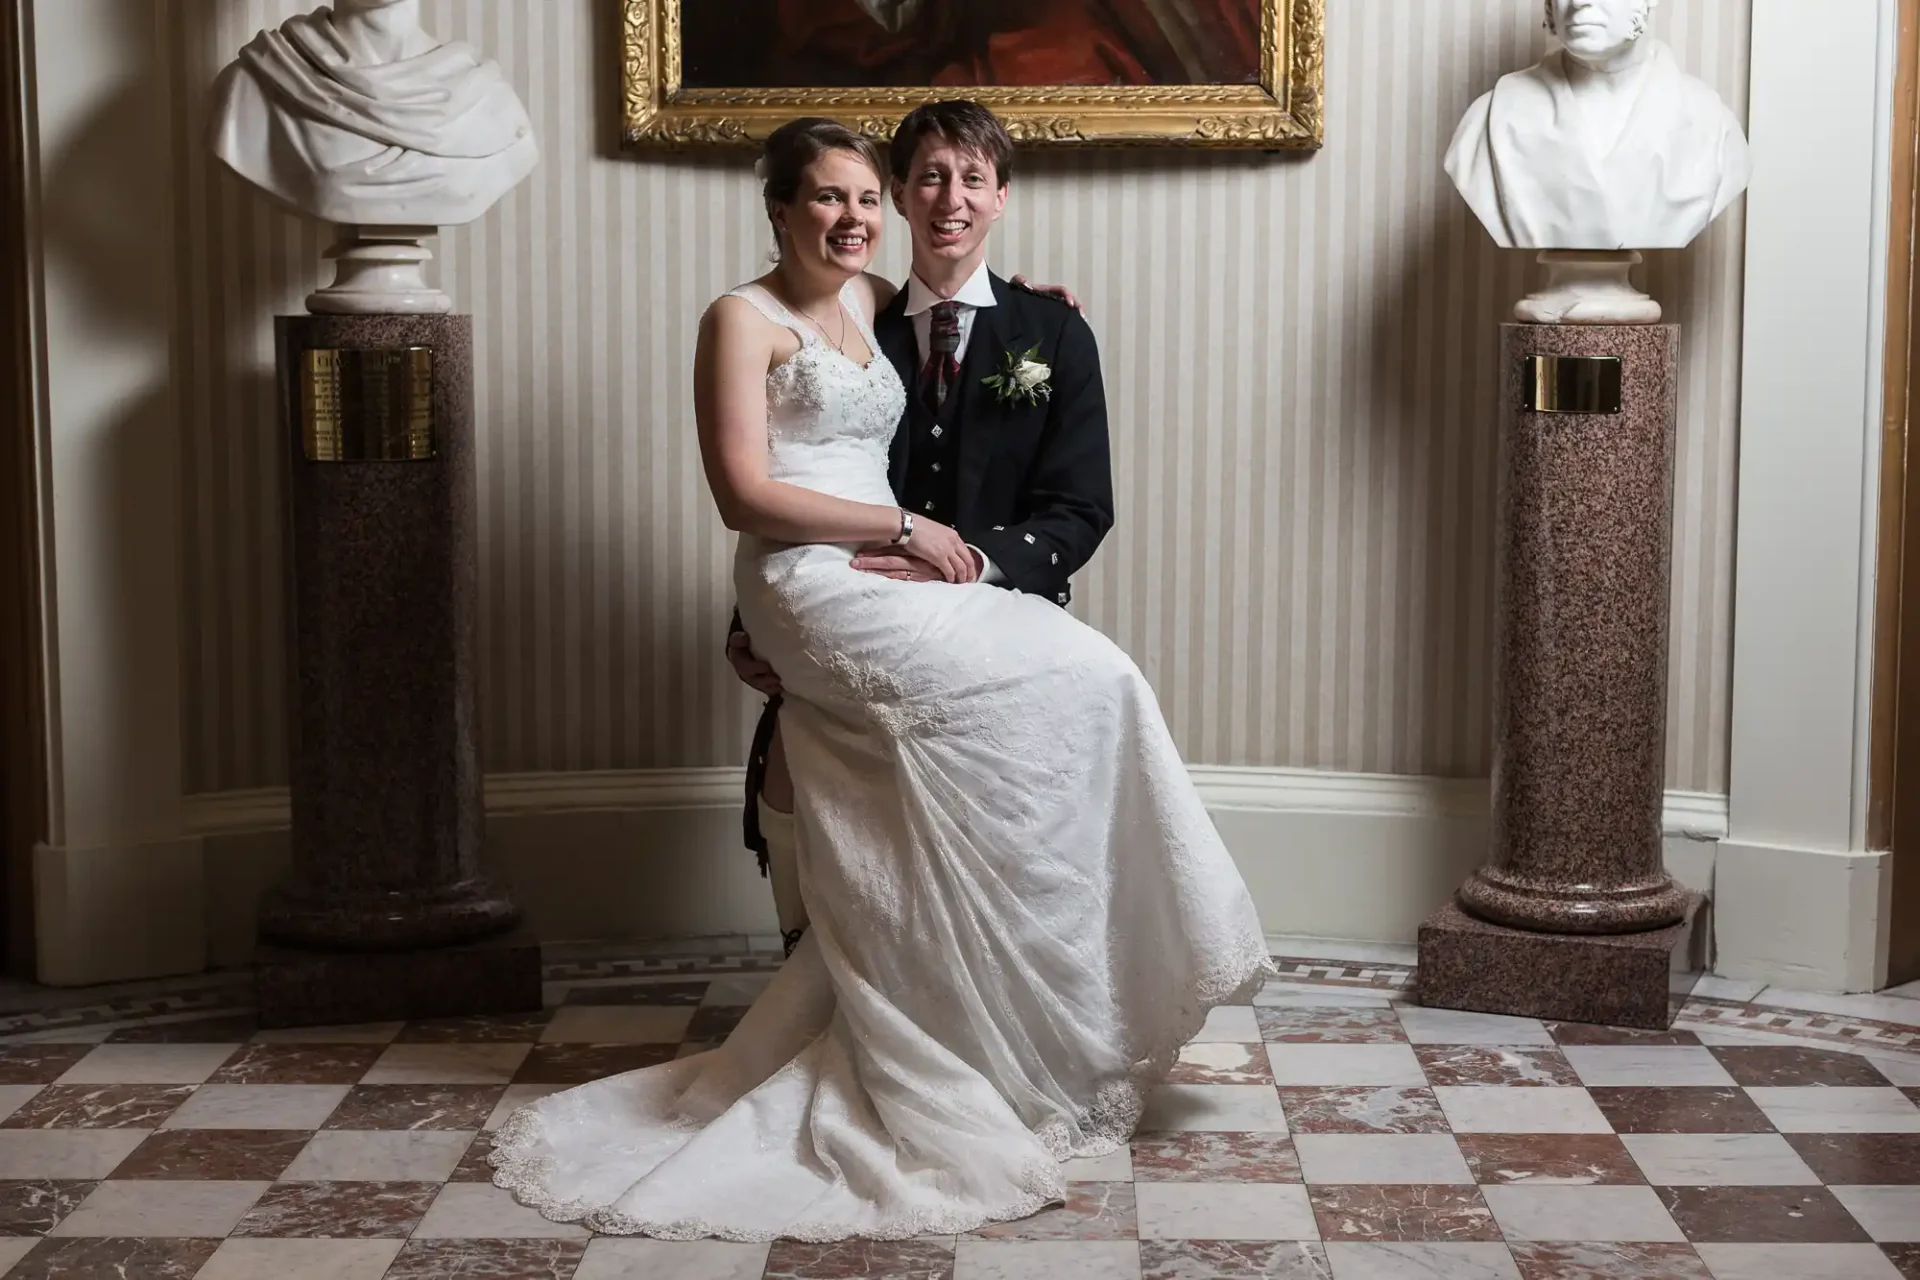 A bride and groom smiling, seated together between two classical bust sculptures in an elegant room with a checkered floor and framed artwork.